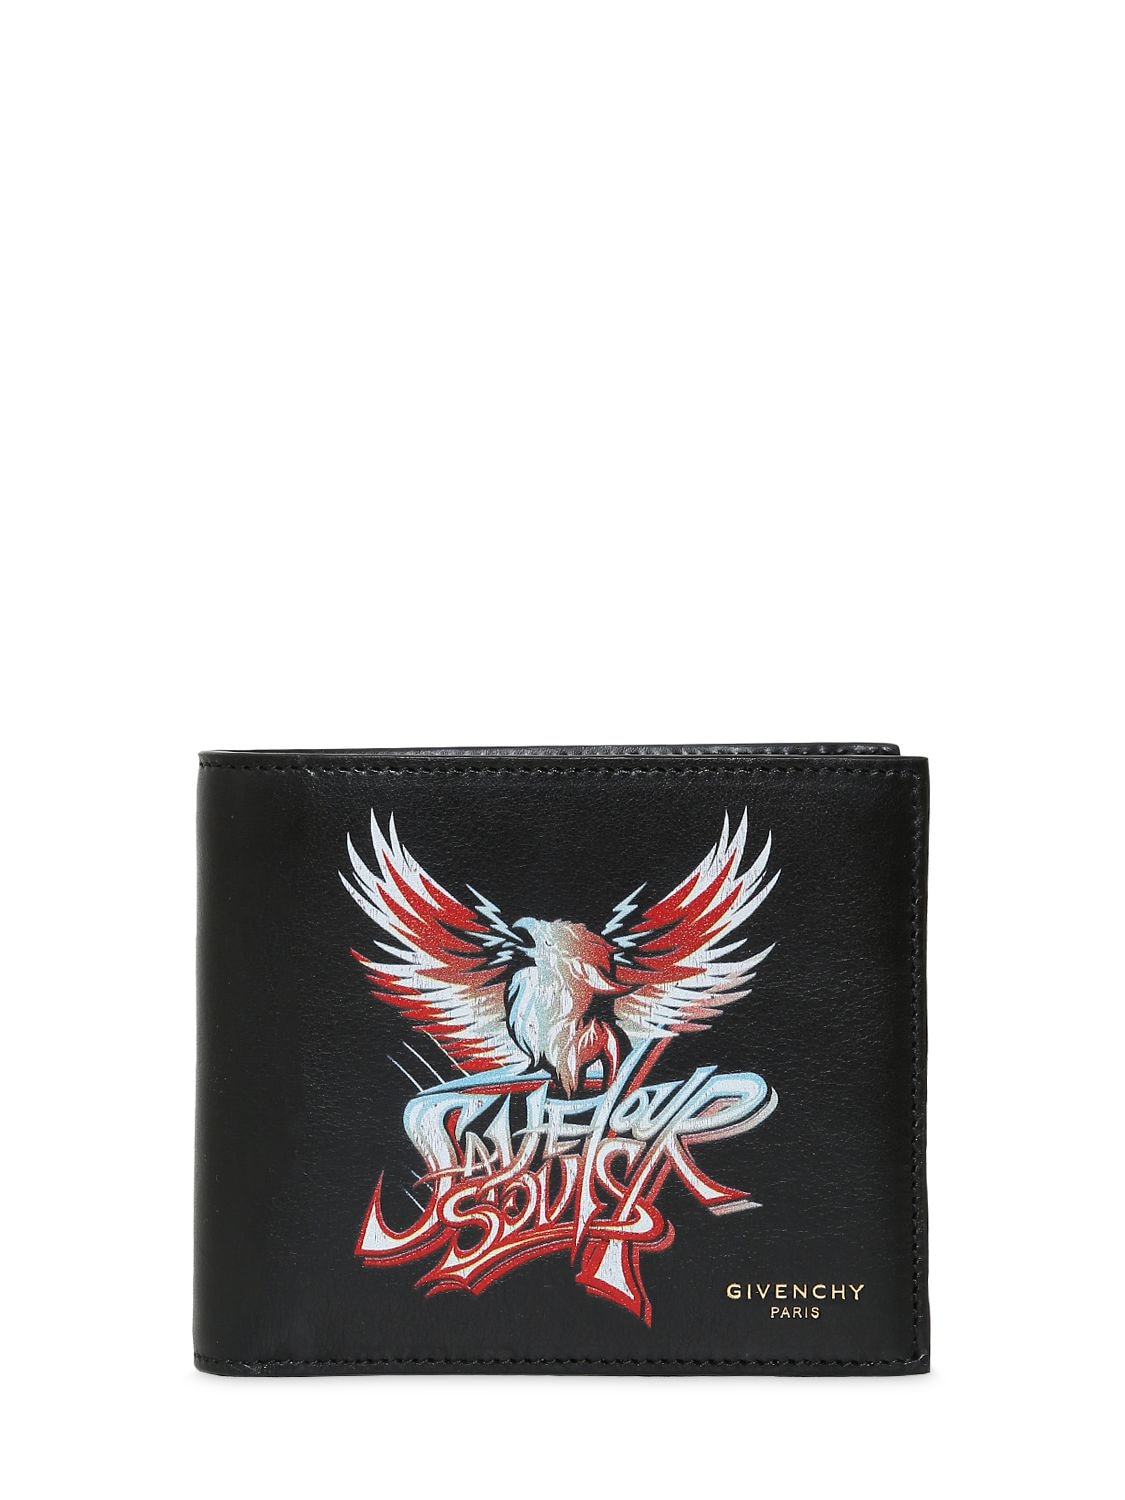 GIVENCHY SAVE OUR SOULS PRINT LEATHER WALLET,68ILBG013-OTYw0